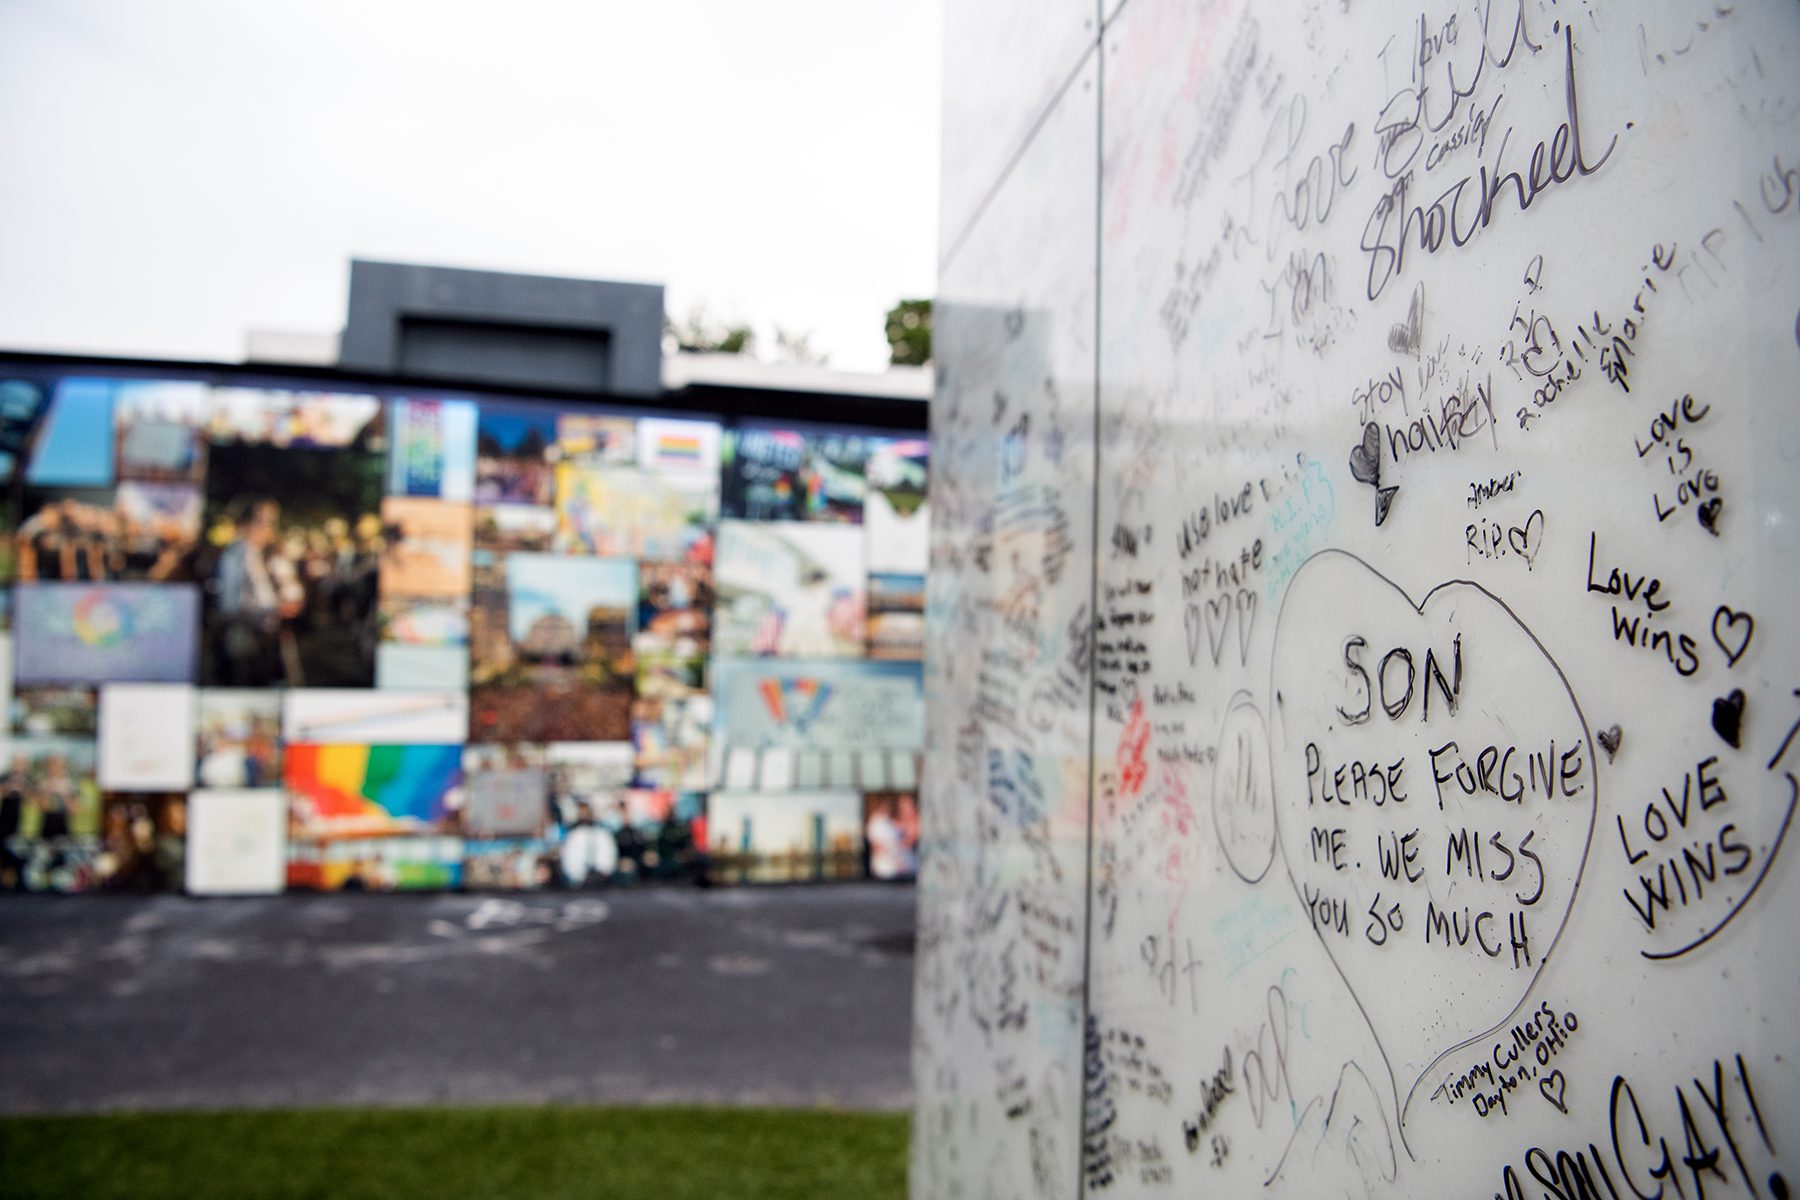 A panel is seen at the Pulse Memorial on which people have left messages such as "Son please forgive me. we miss you so much."